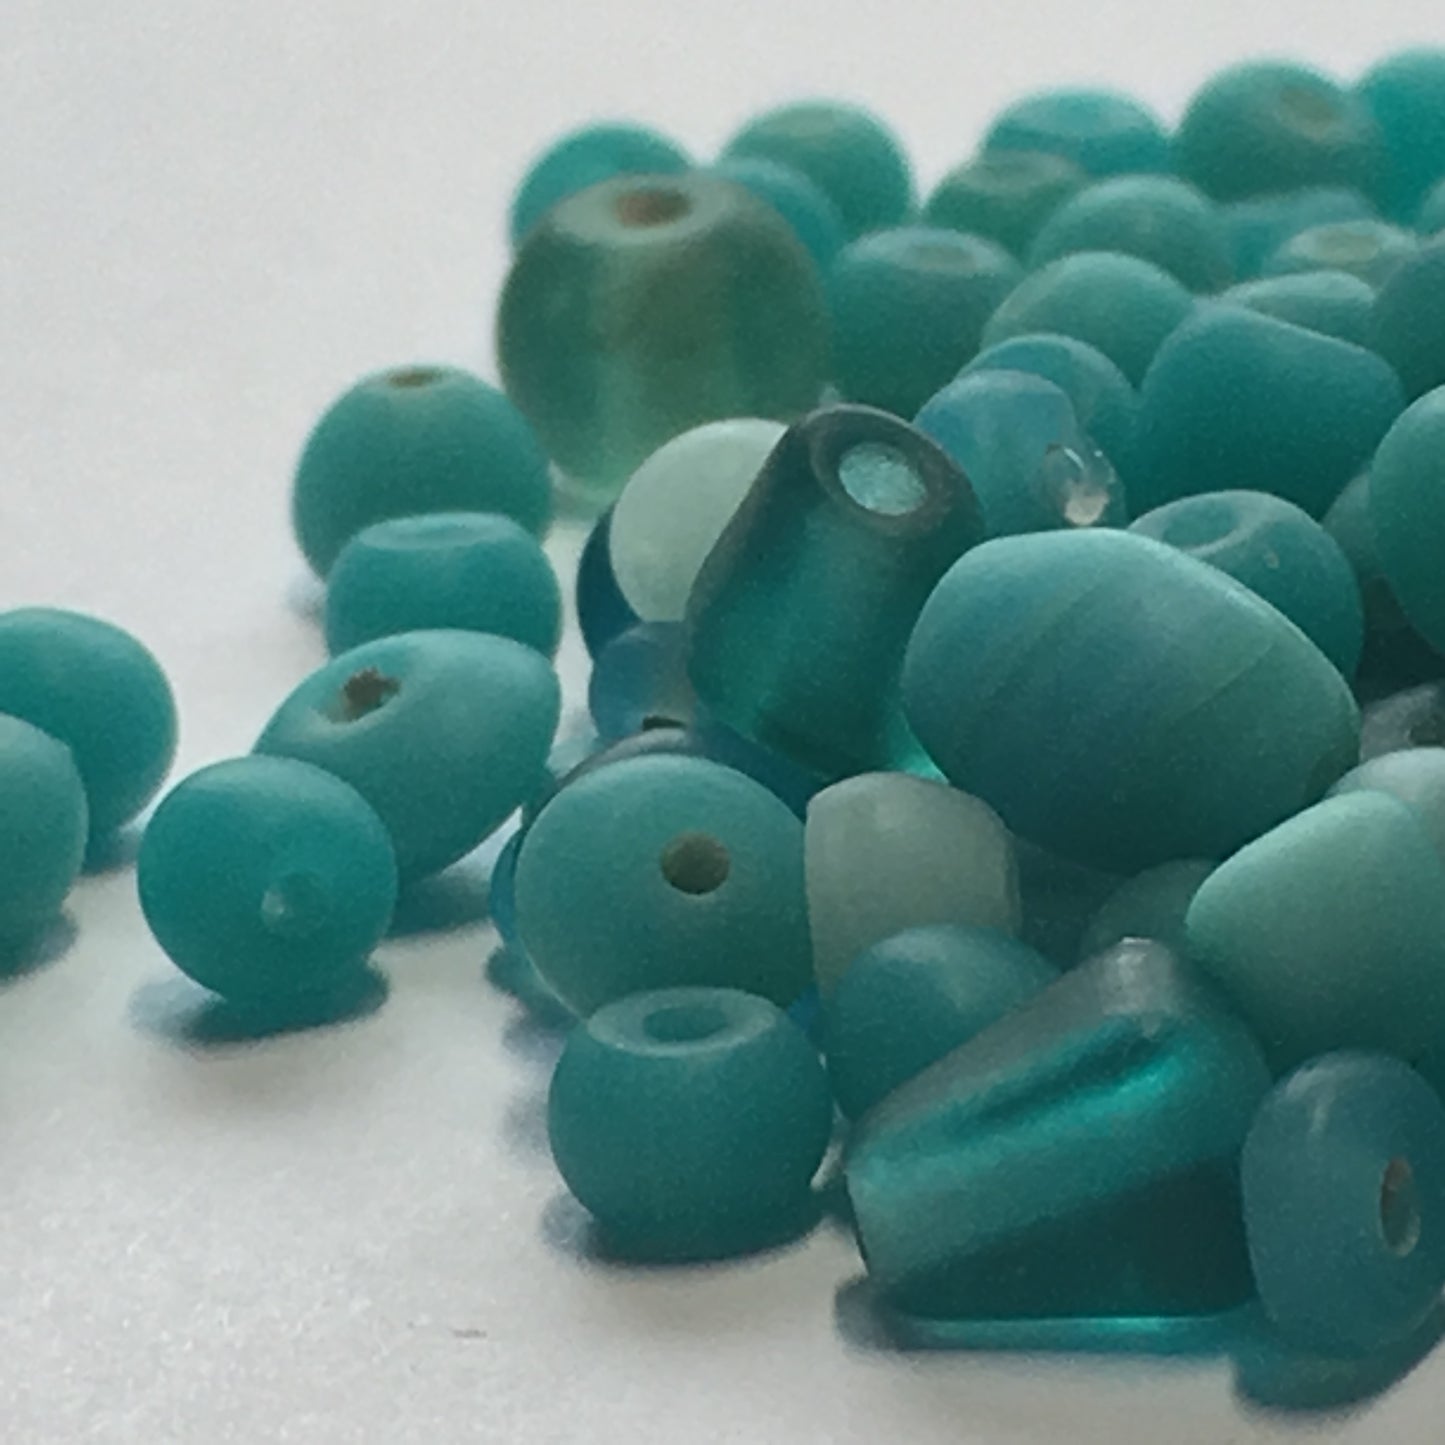 Frosted Teal Green Glass Bead Mix, Rounds, Saucers and Others, Over 100 Beads